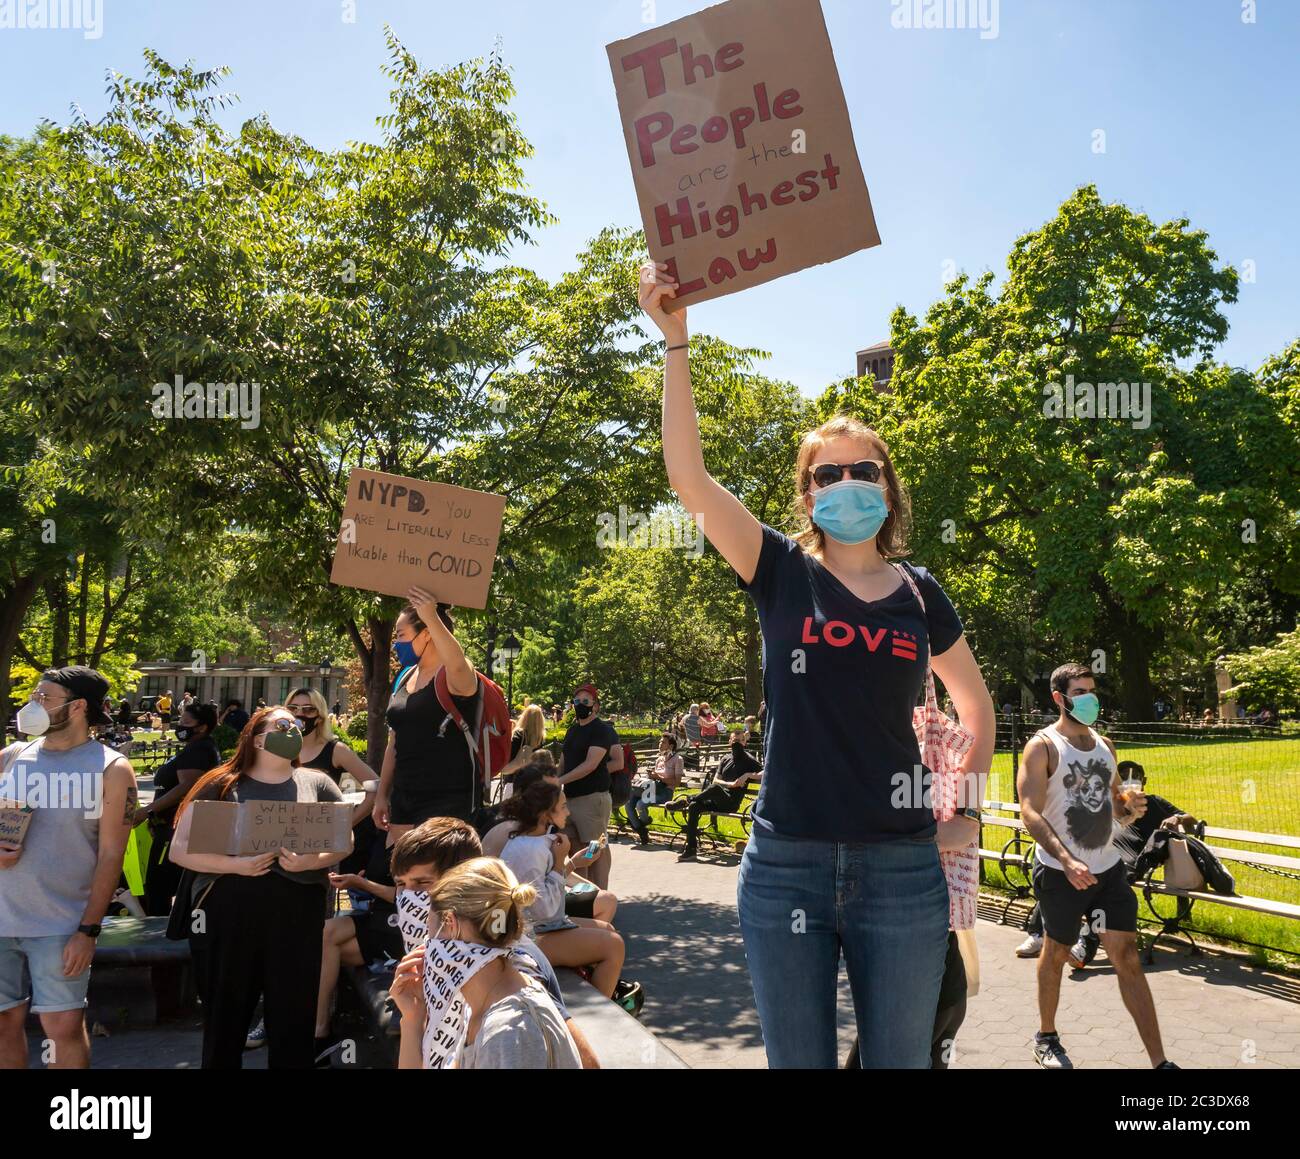 Black Lives Matter demonstrators rally, prior to marching, in Washington Square Park in New York protesting the death of George Floyd, seen on Saturday, June 13, 2020. (© Richard B. Levine) Stock Photo